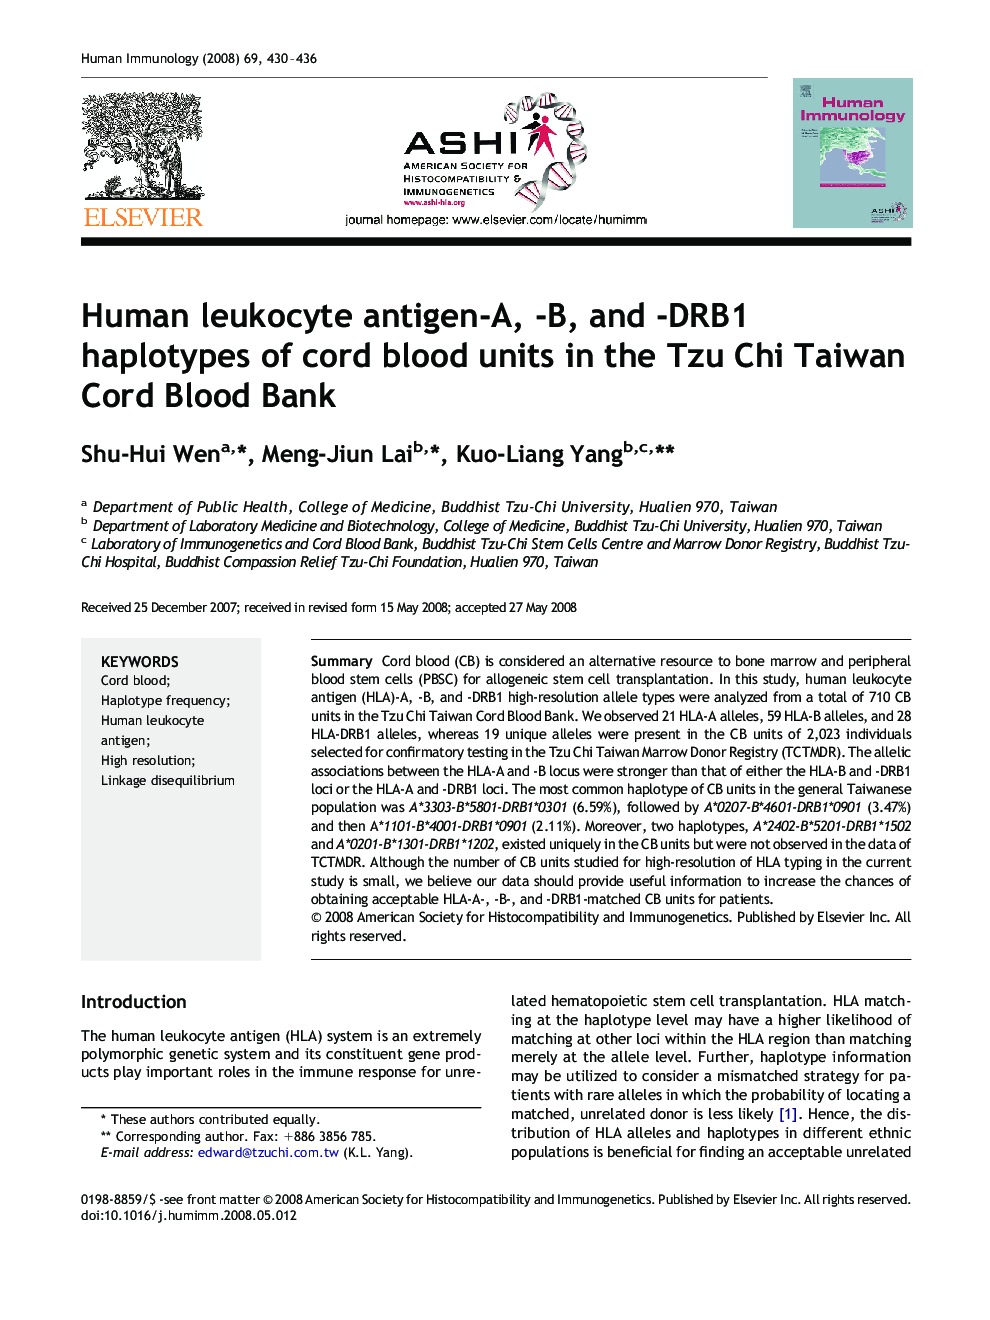 Human leukocyte antigen-A, -B, and -DRB1 haplotypes of cord blood units in the Tzu Chi Taiwan Cord Blood Bank